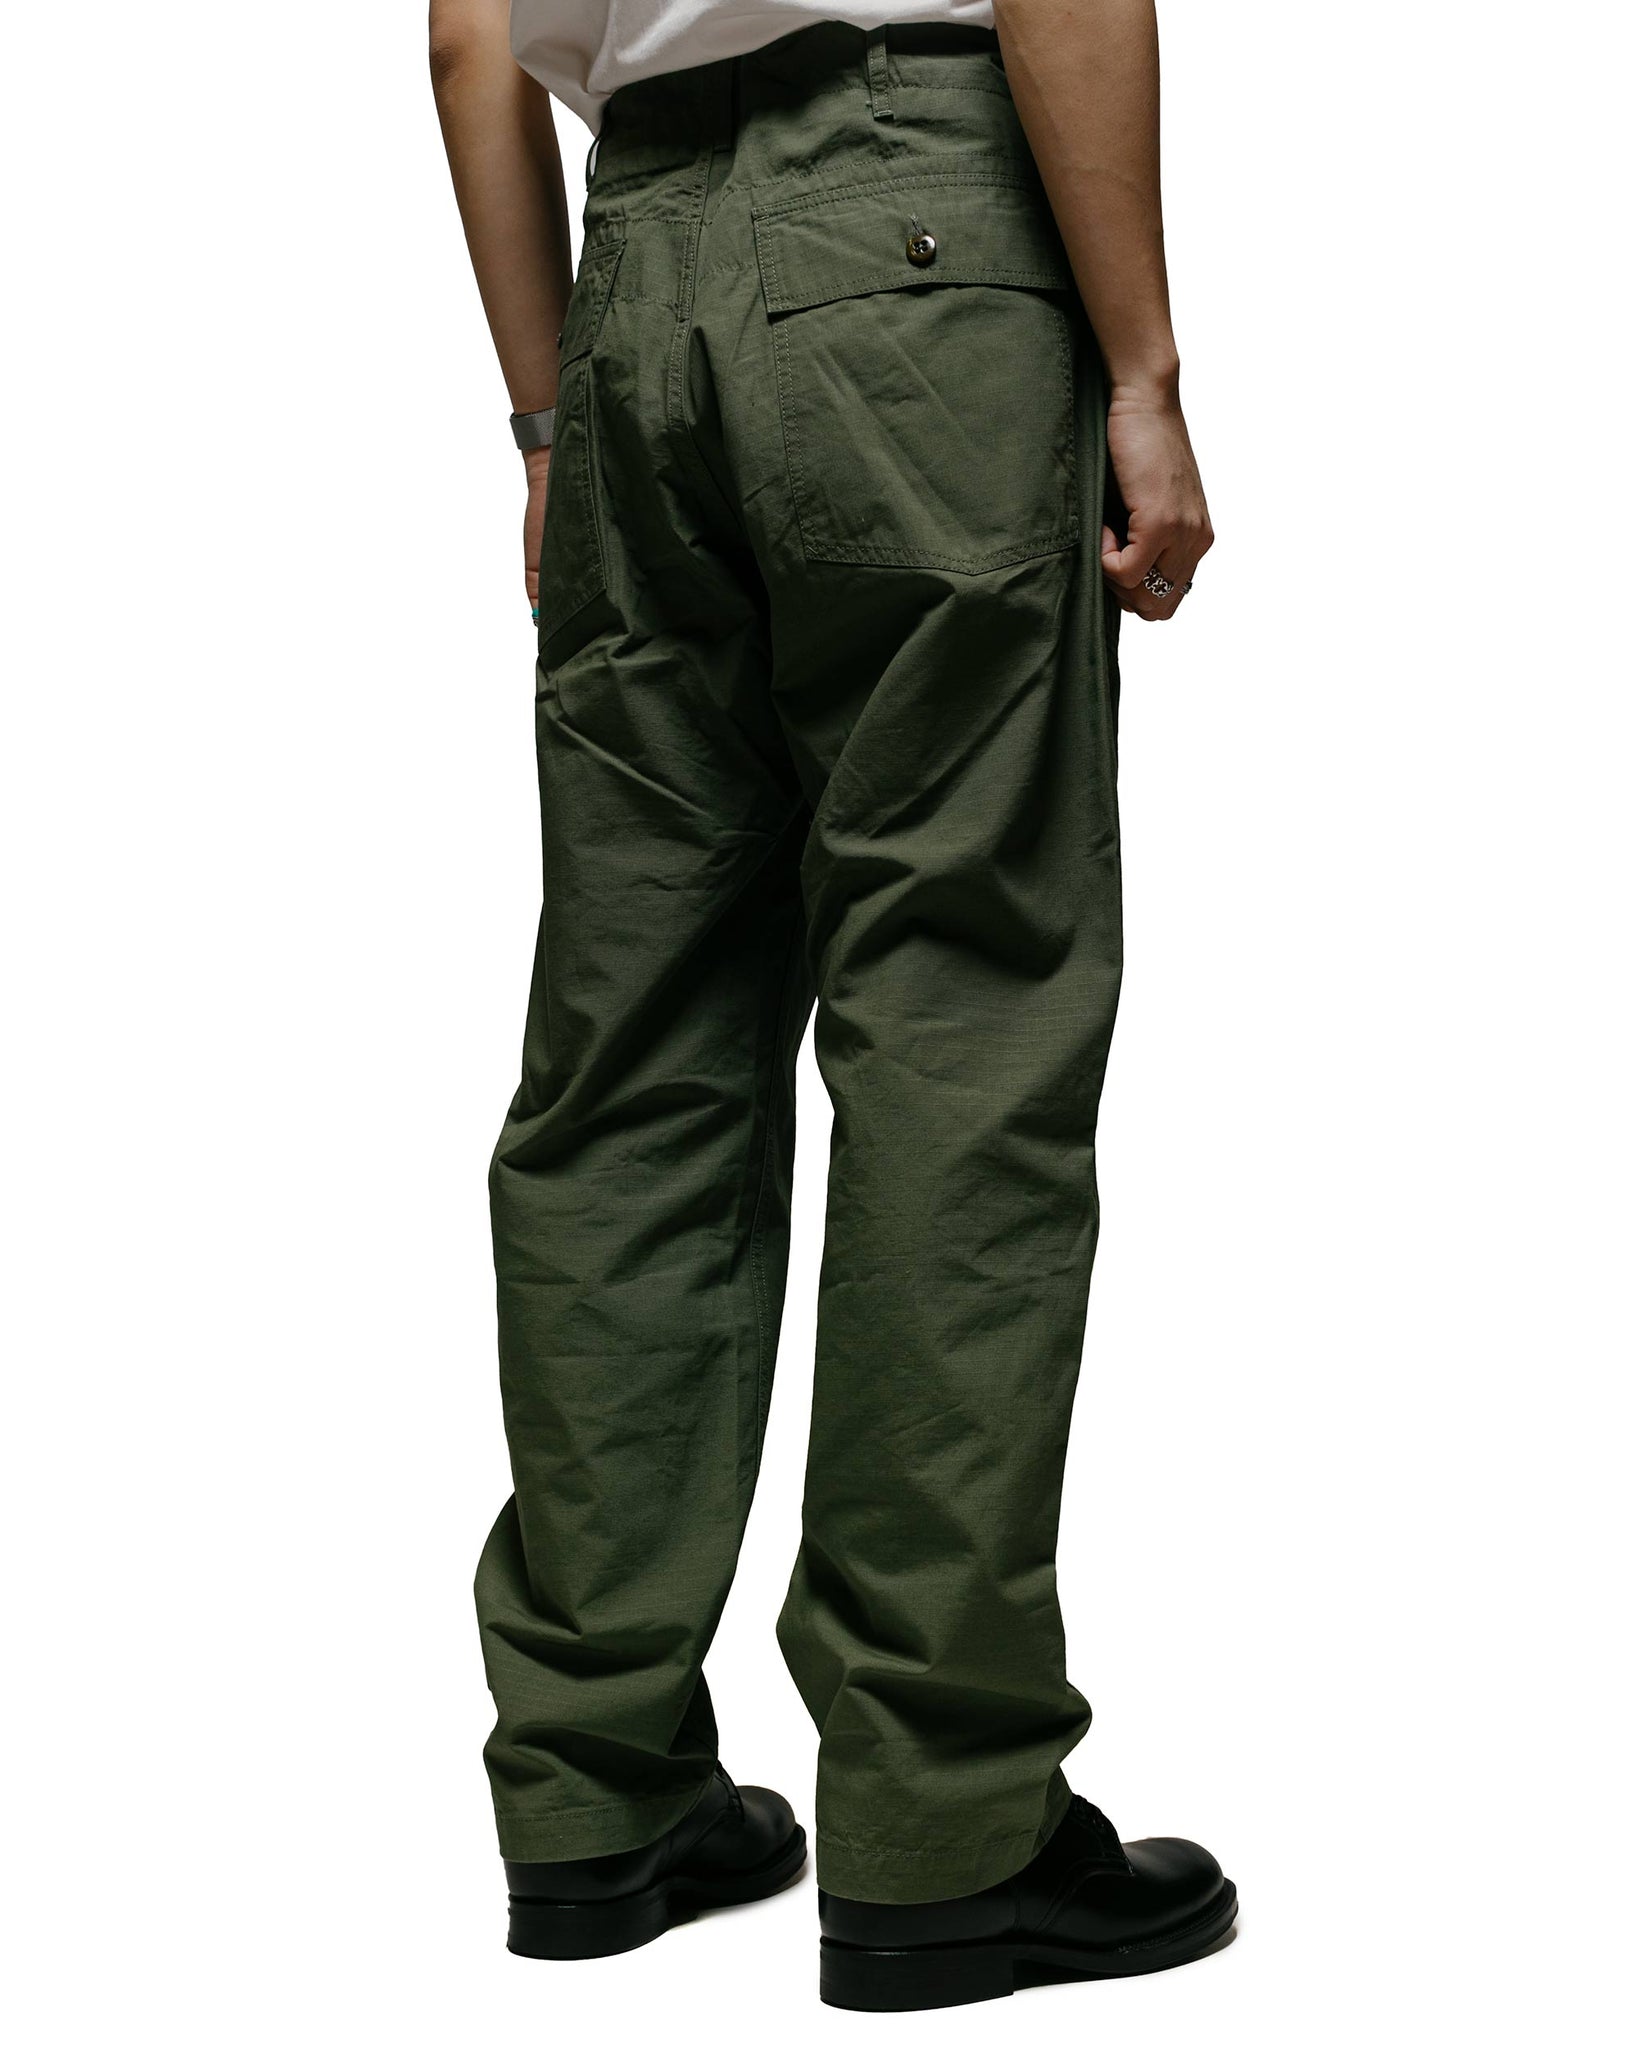 Engineered Garments Fatigue Pant Olive Cotton Ripstop model back